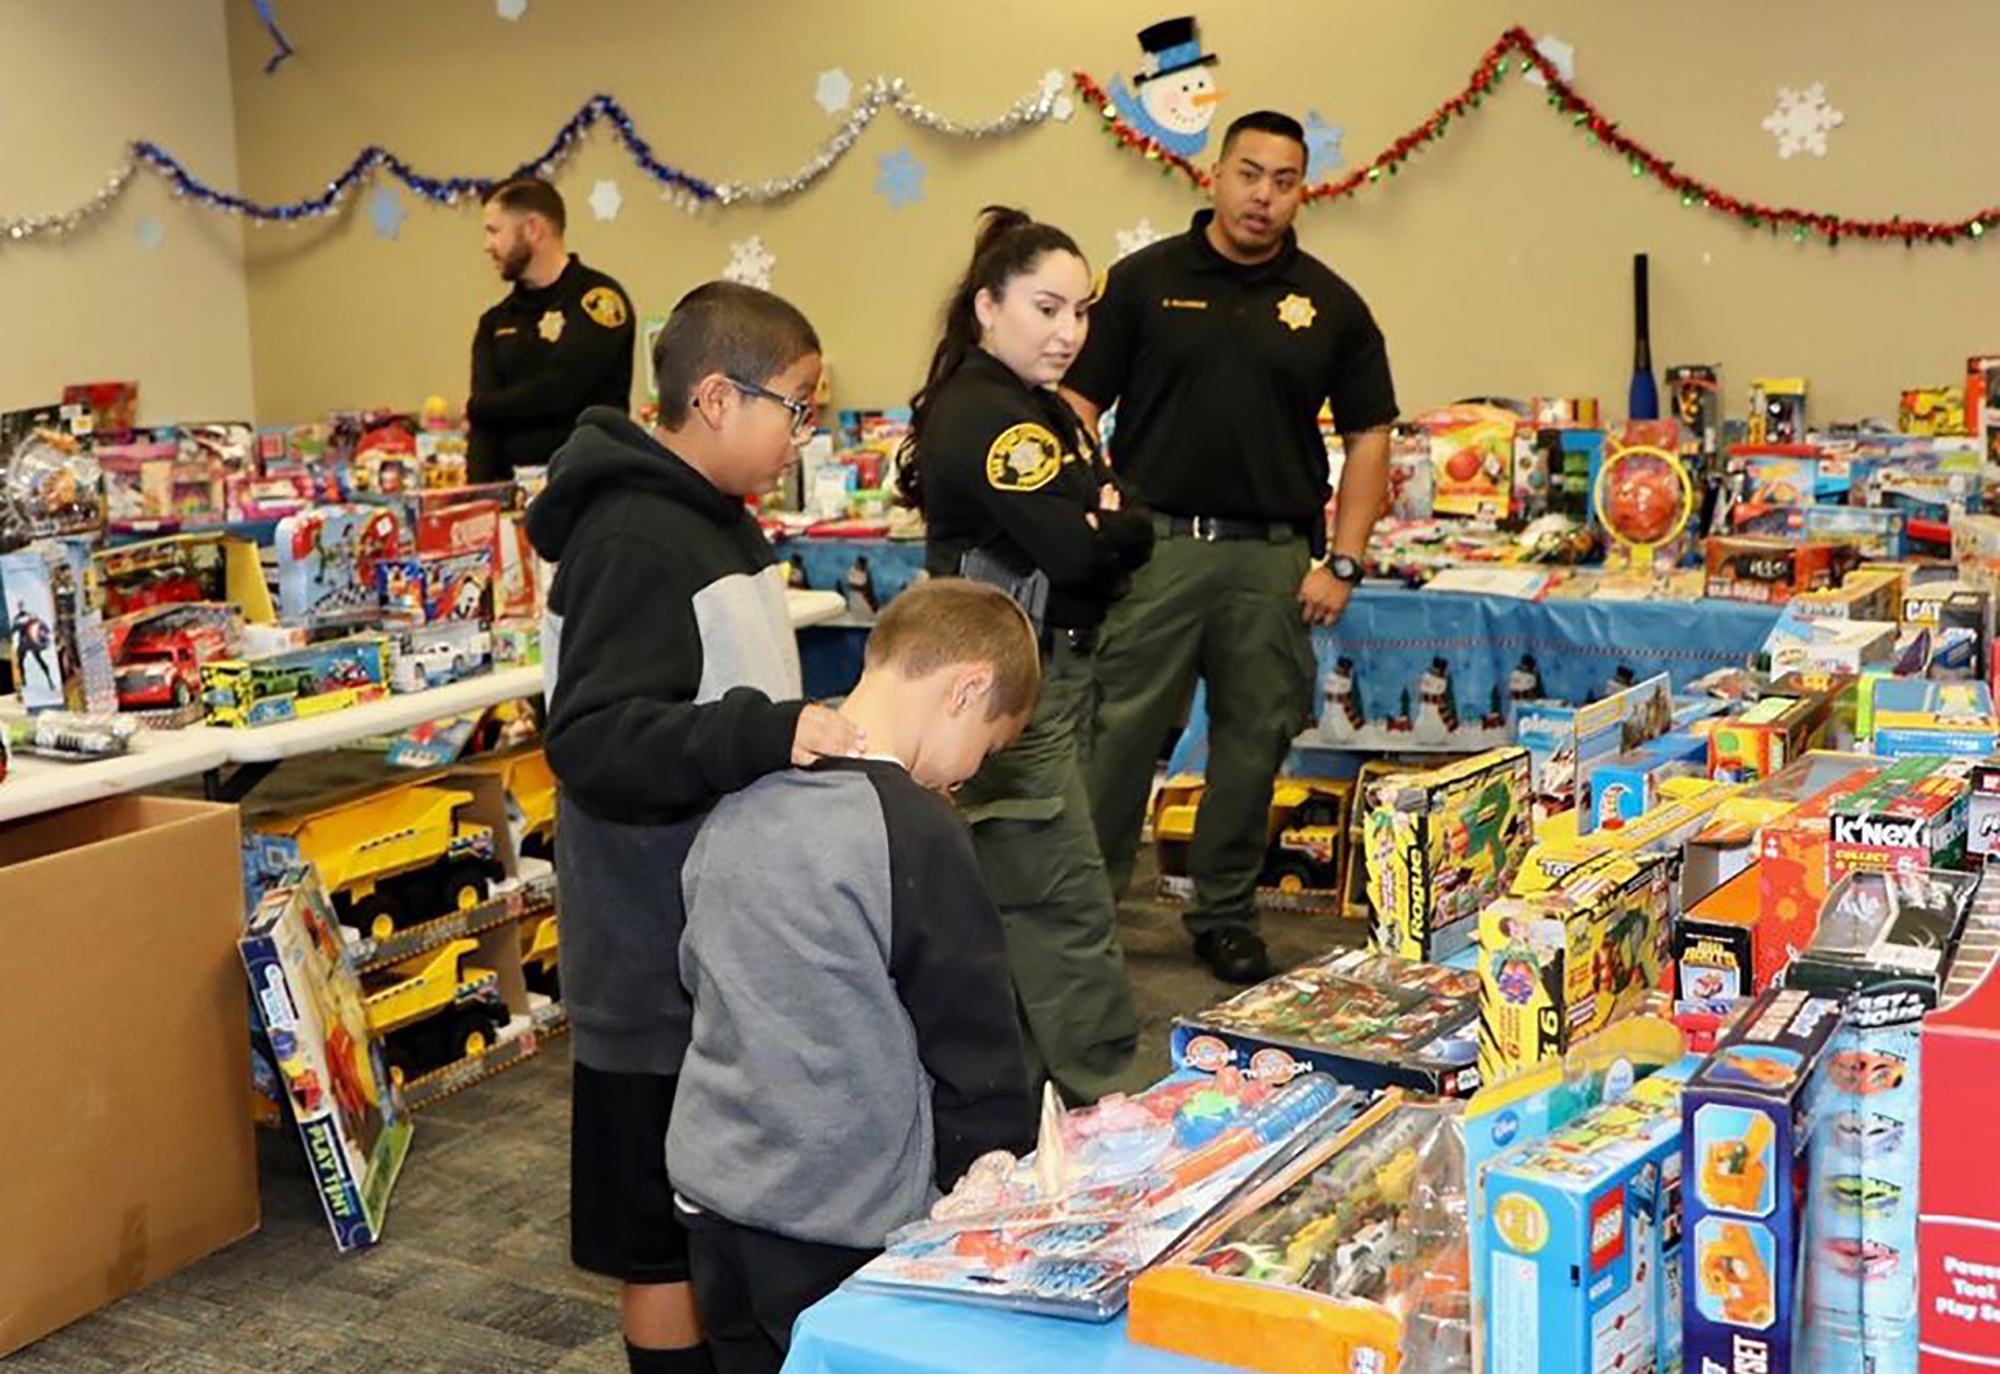 Two young boys select a toy from a toy display and get help from Probation officers.